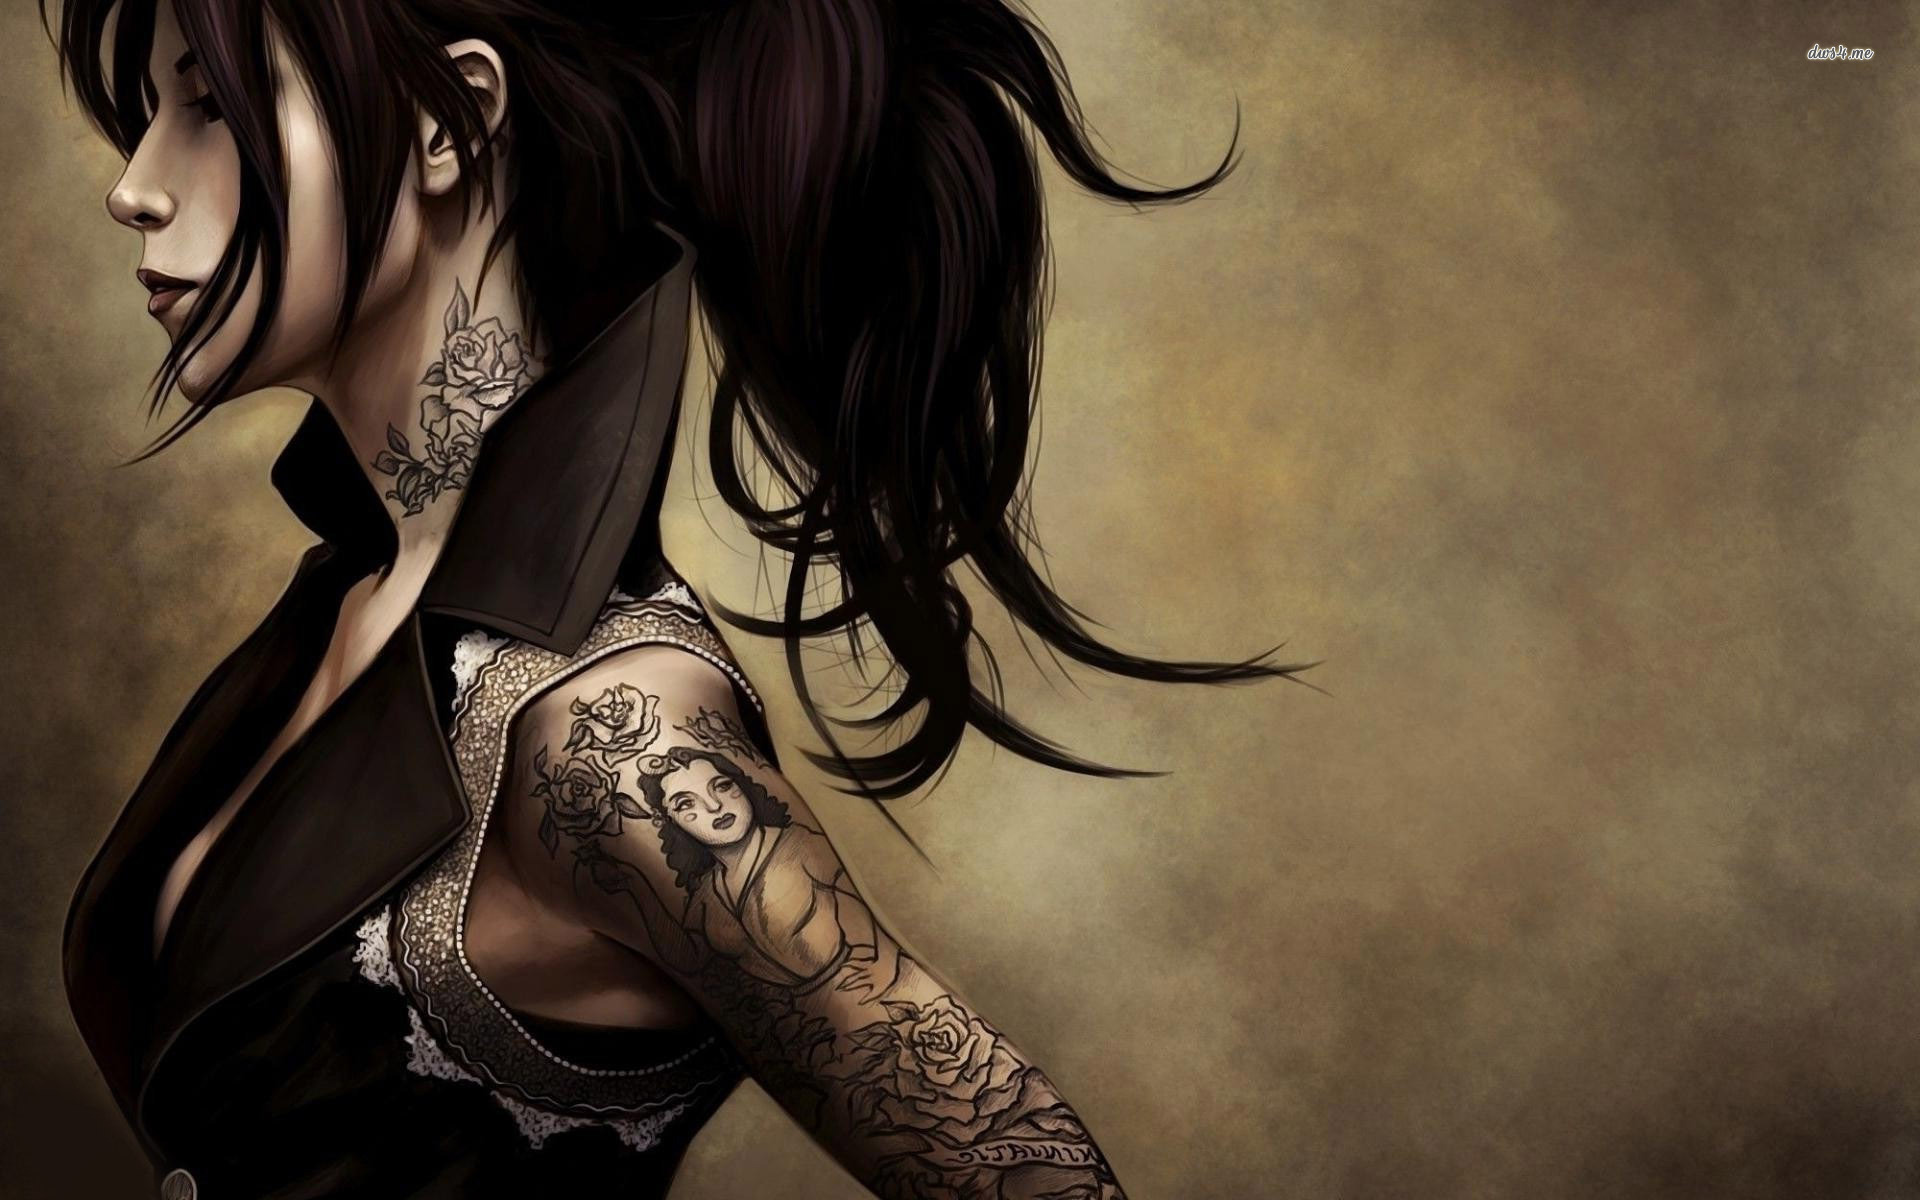 You Can Tattooed Woman Artistic Wallpaper In